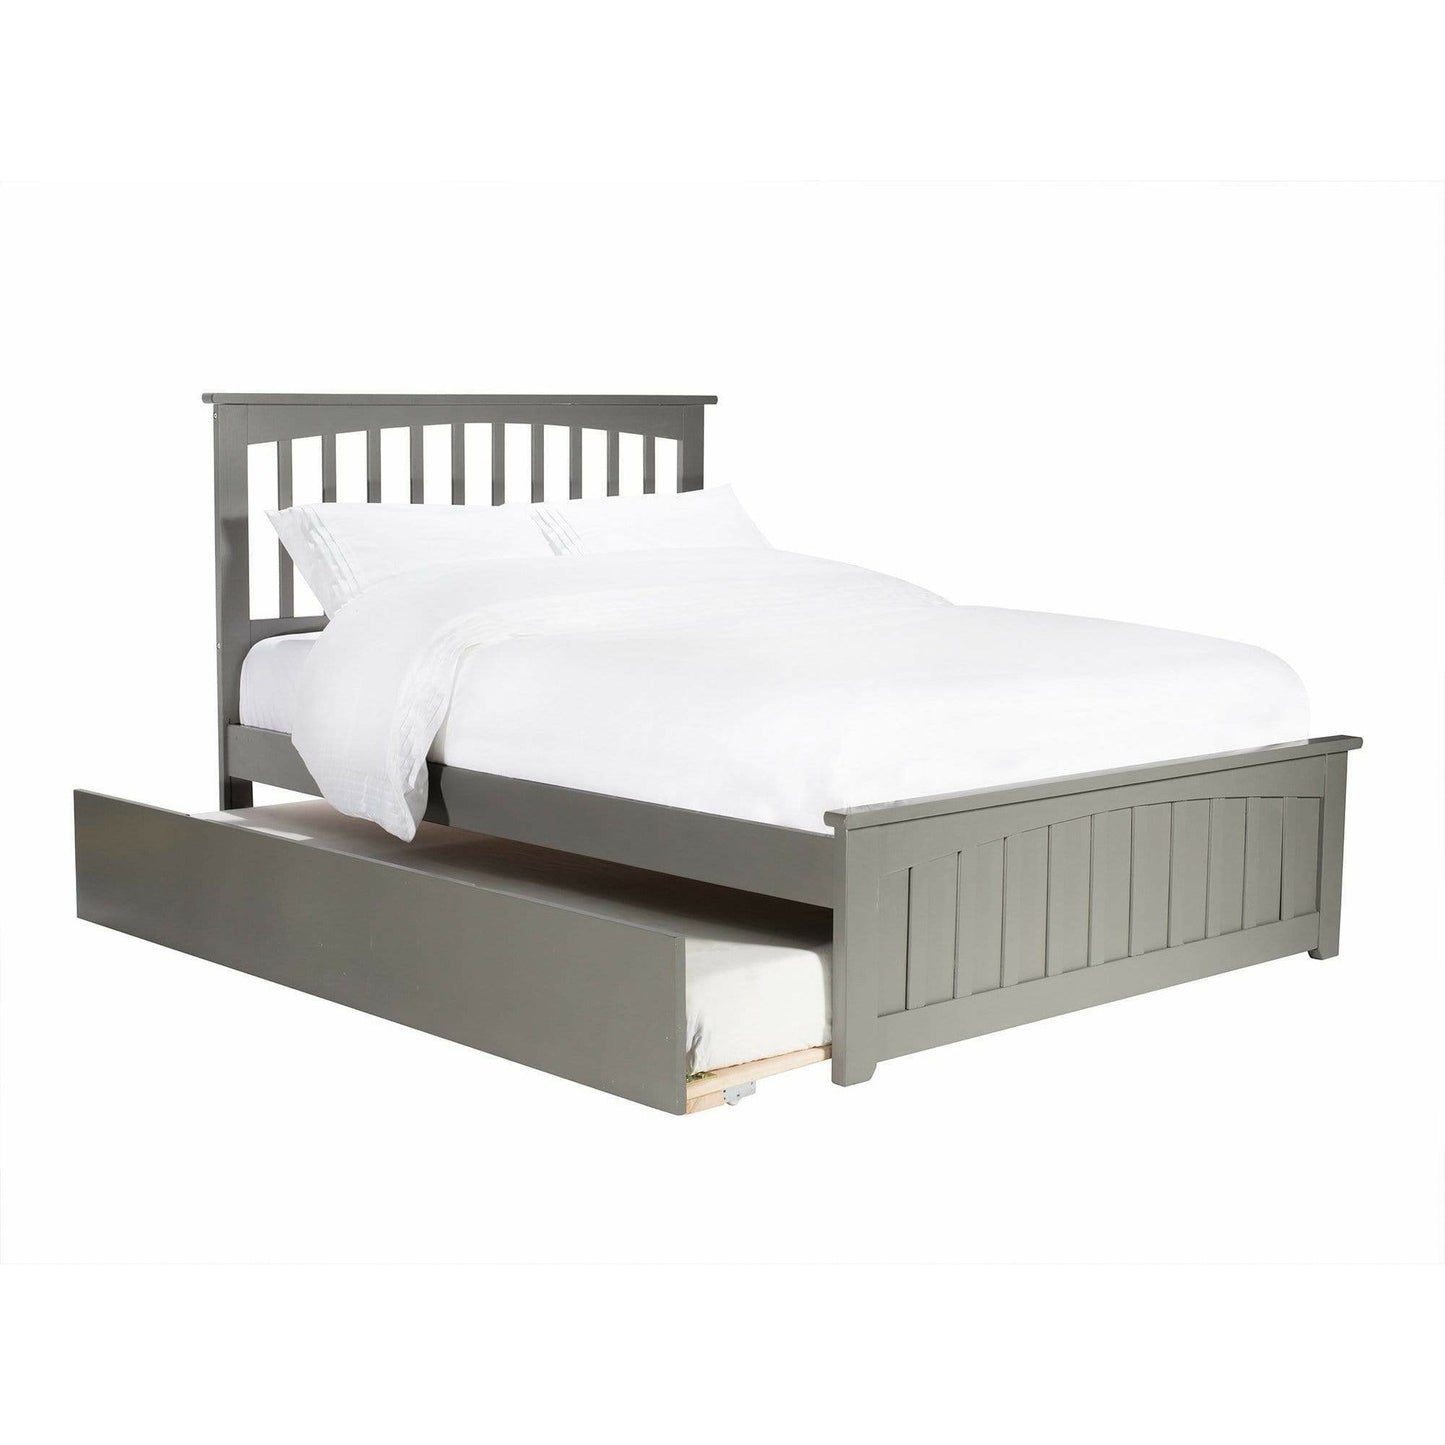 Atlantic Furniture Bed Mission Full Platform Bed with Matching Foot Board with Twin Size Urban Trundle Bed in Espresso